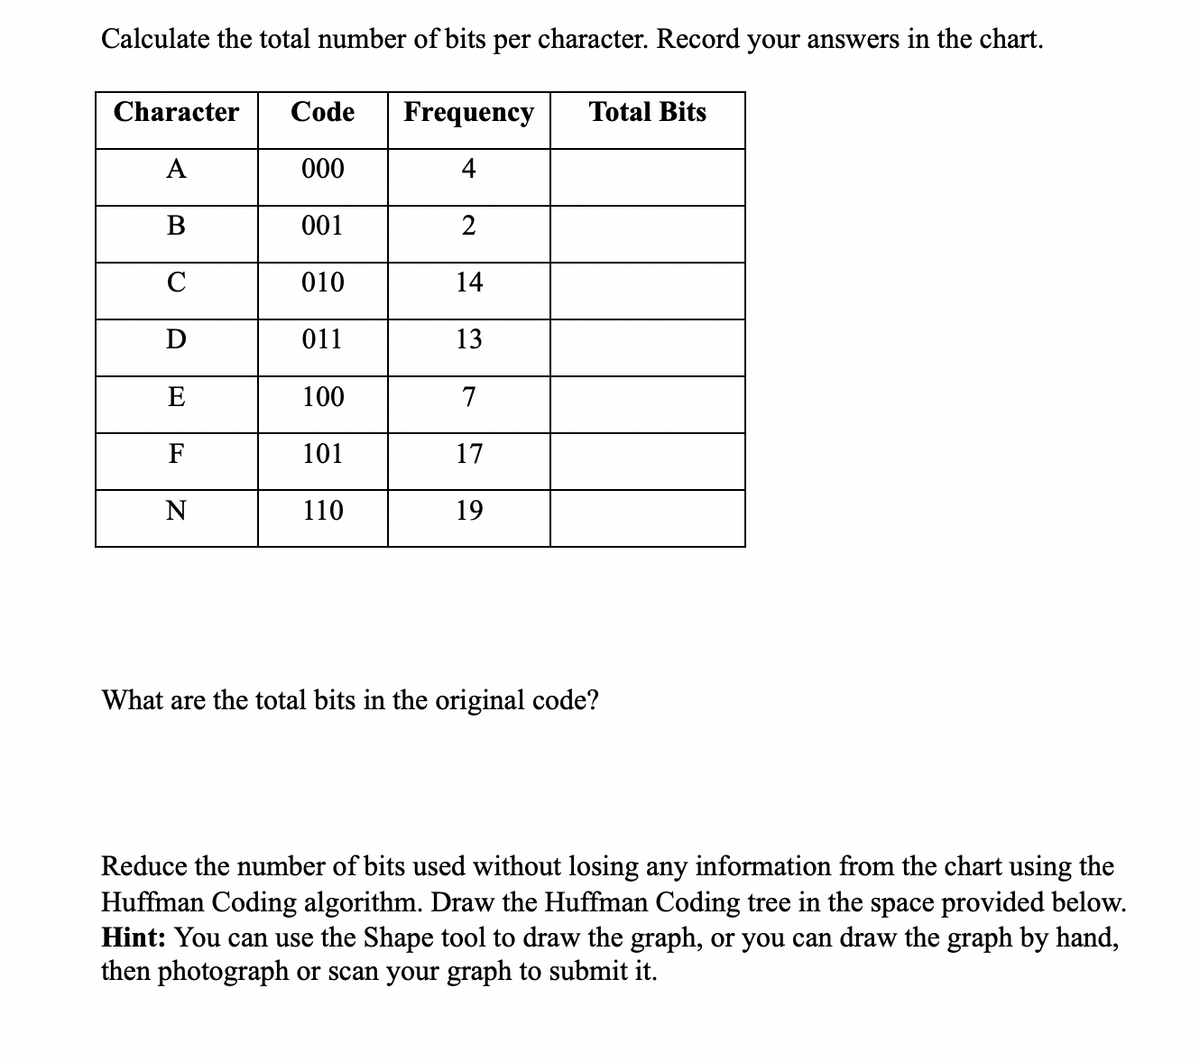 Calculate the total number of bits per character. Record your answers in the chart.
Character
Code
Frequency
Total Bits
A
000
4
В
001
C
010
14
D
011
13
E
100
7
F
101
17
N
110
19
What are the total bits in the original code?
Reduce the number of bits used without losing any information from the chart using the
Huffman Coding algorithm. Draw the Huffman Coding tree in the space provided below.
Hint: You can use the Shape tool to draw the graph, or you can draw the graph by hand,
then photograph or scan your graph to submit it.
